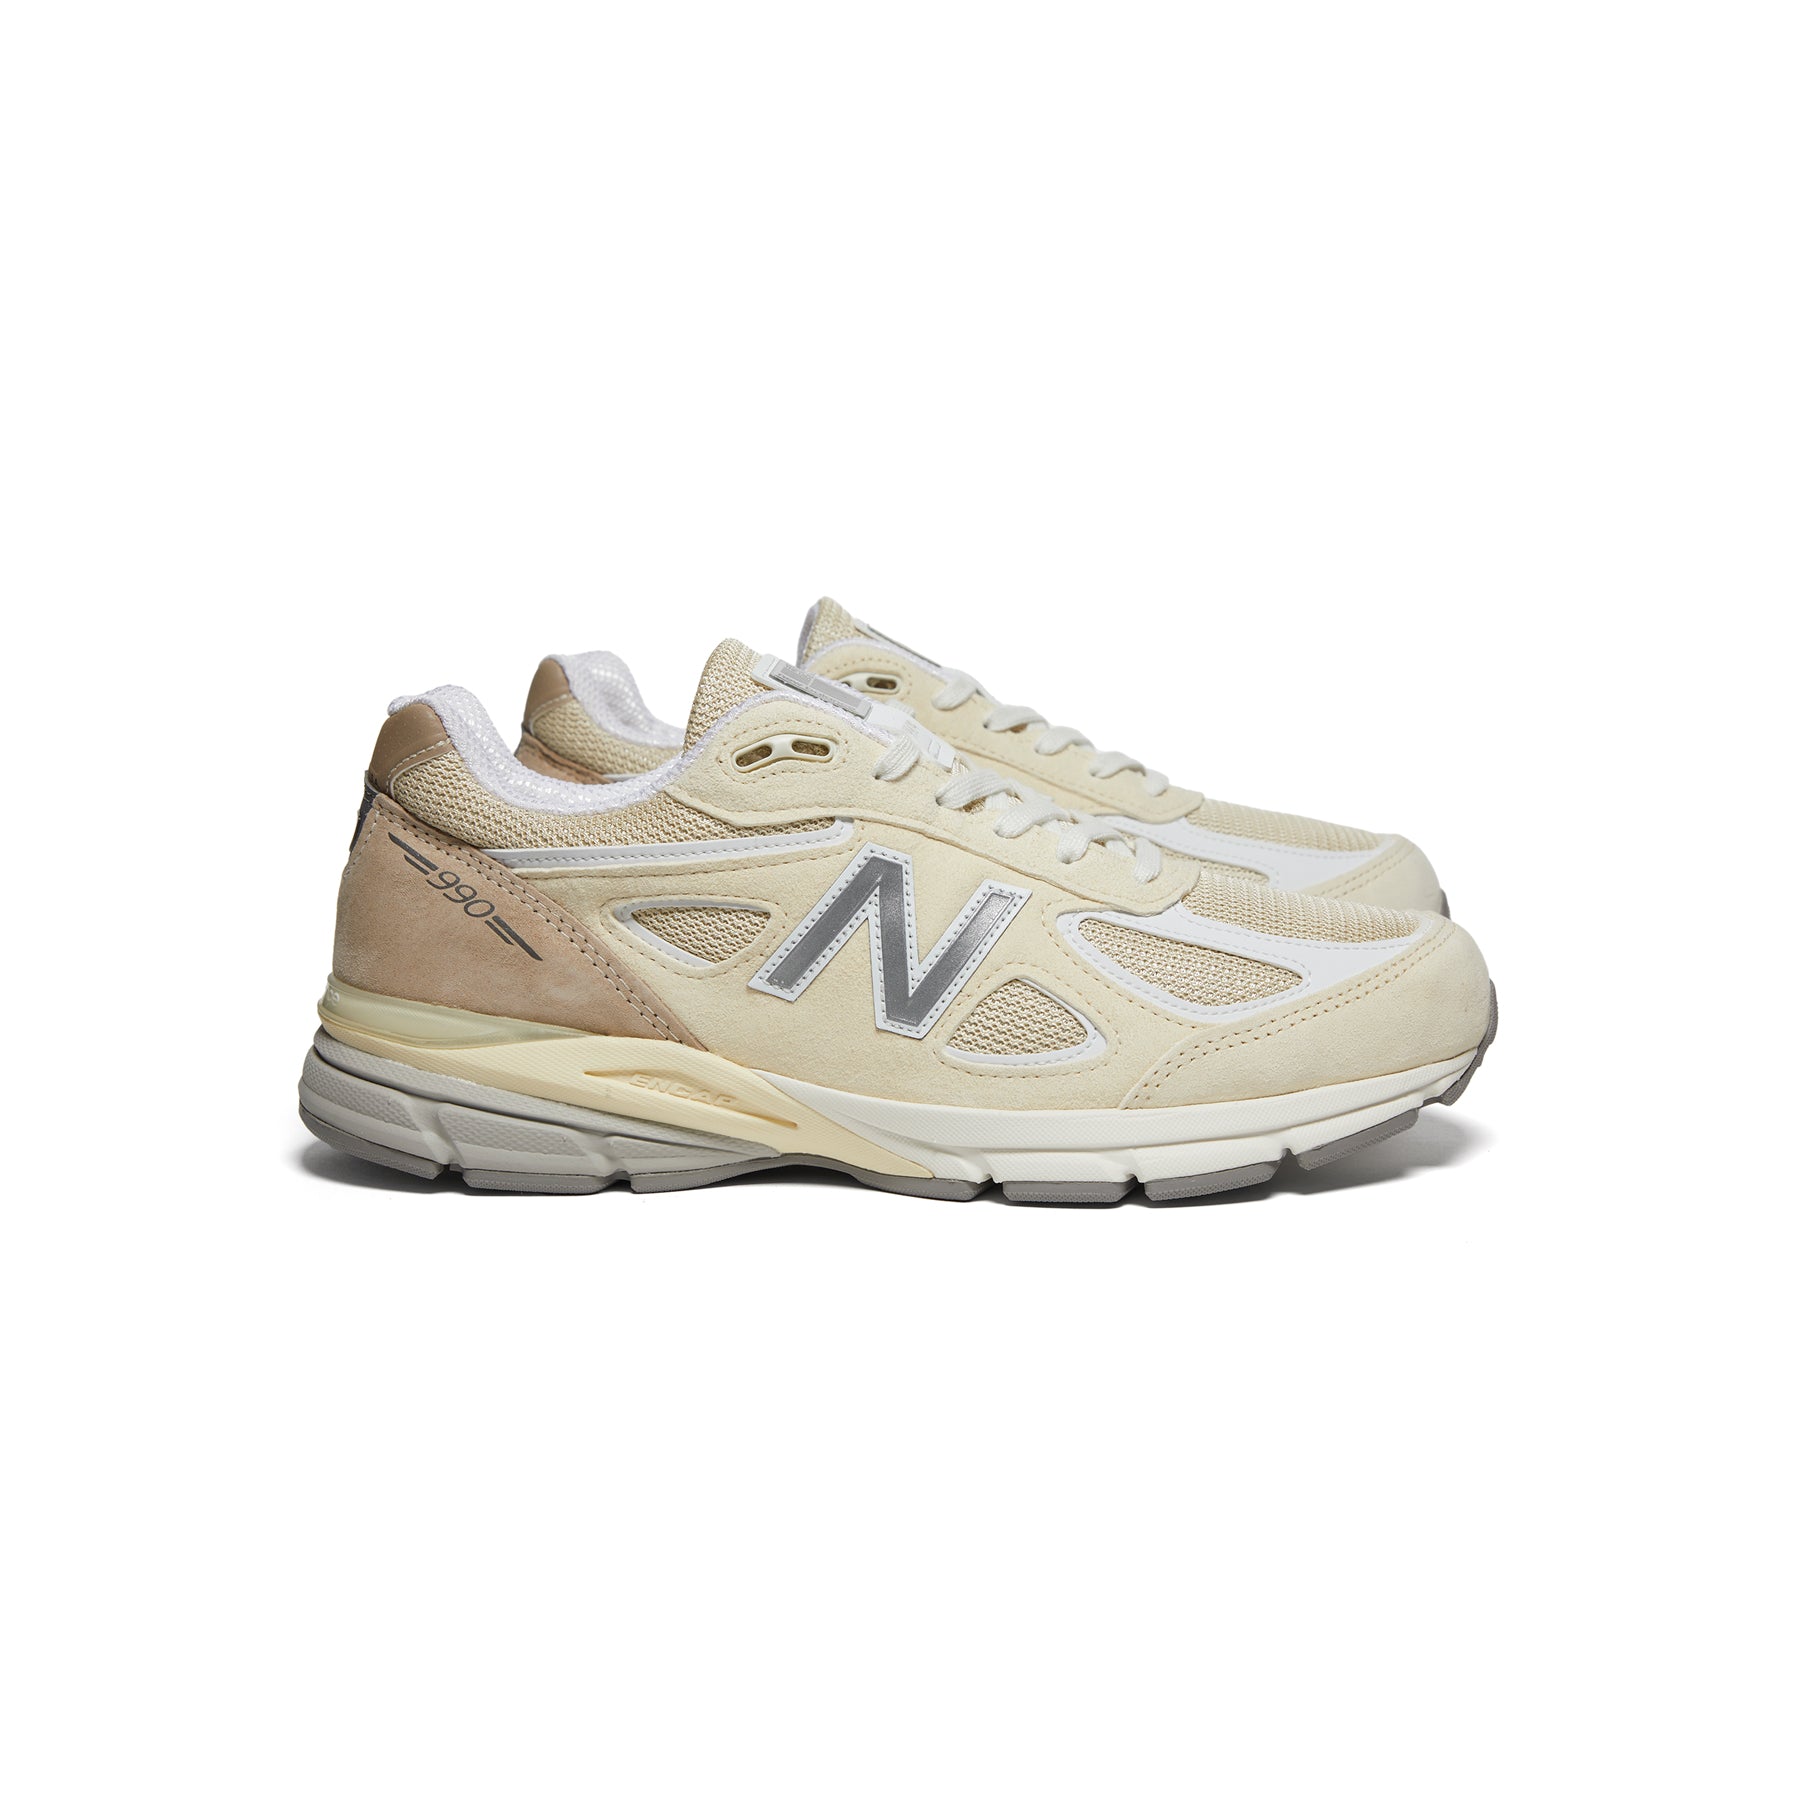 NEW BALANCE 990v4 Suede and Mesh Sneakers for Men